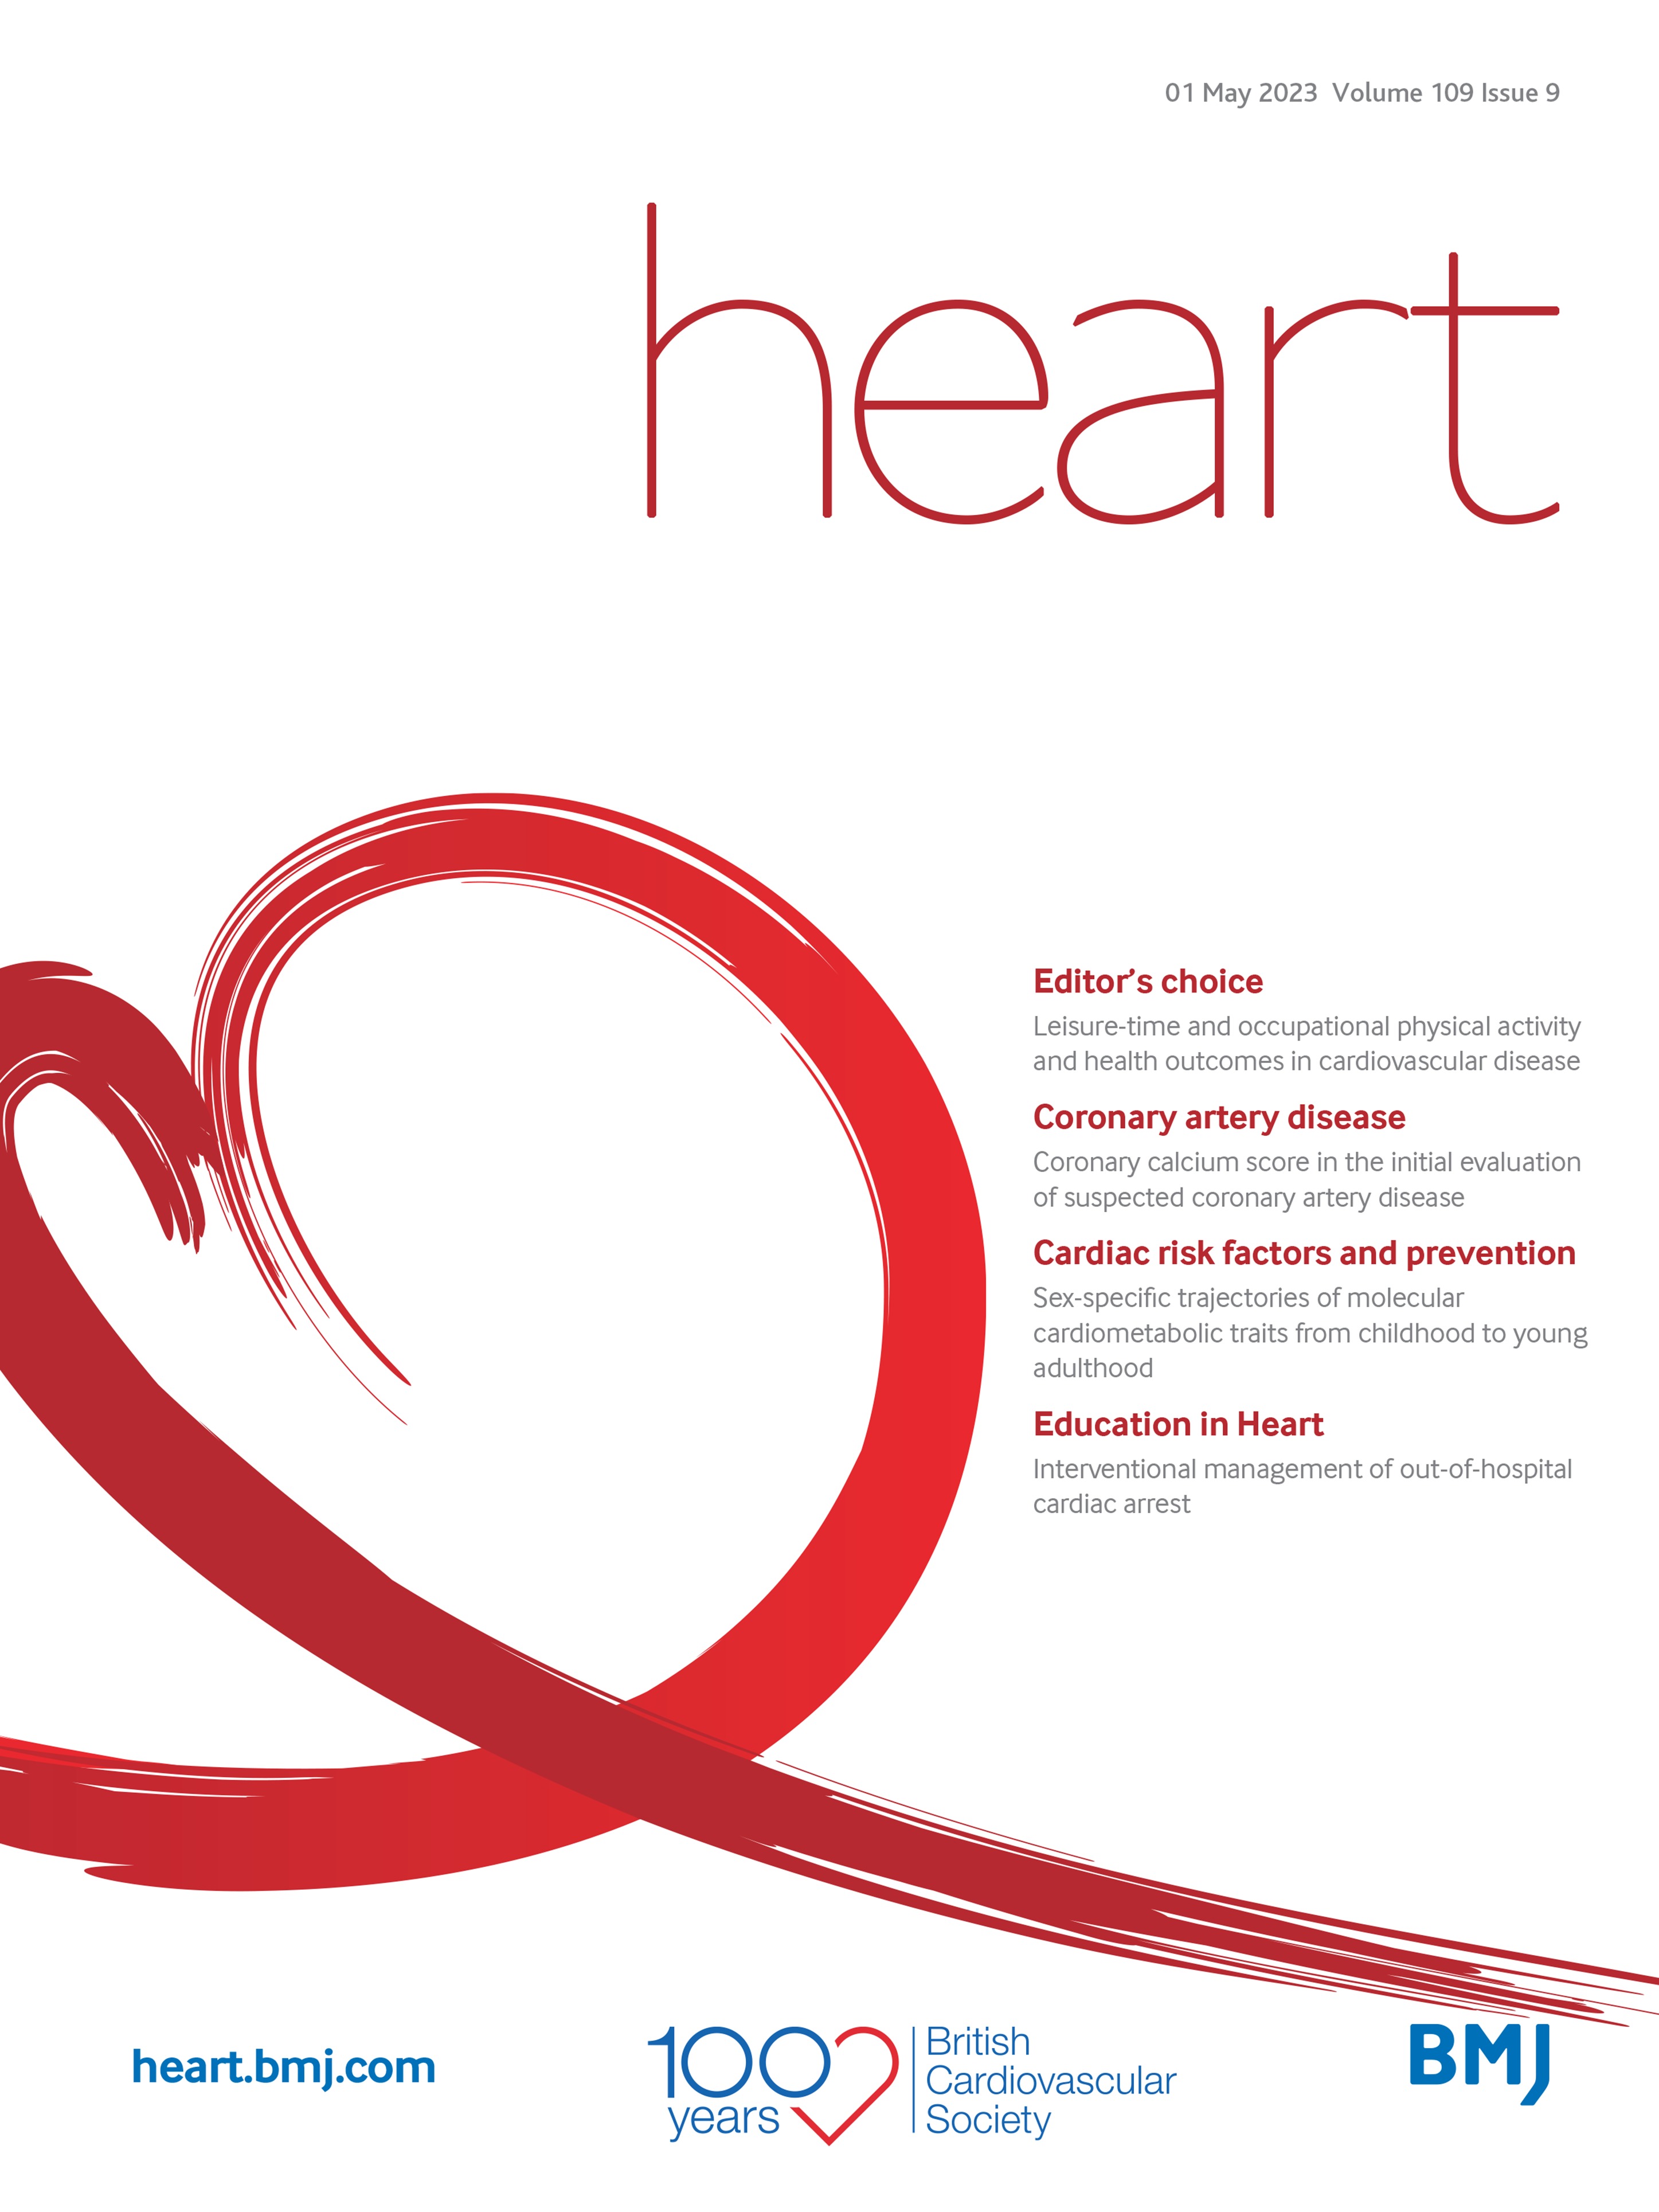 Interventional management of out-of-hospital cardiac arrest